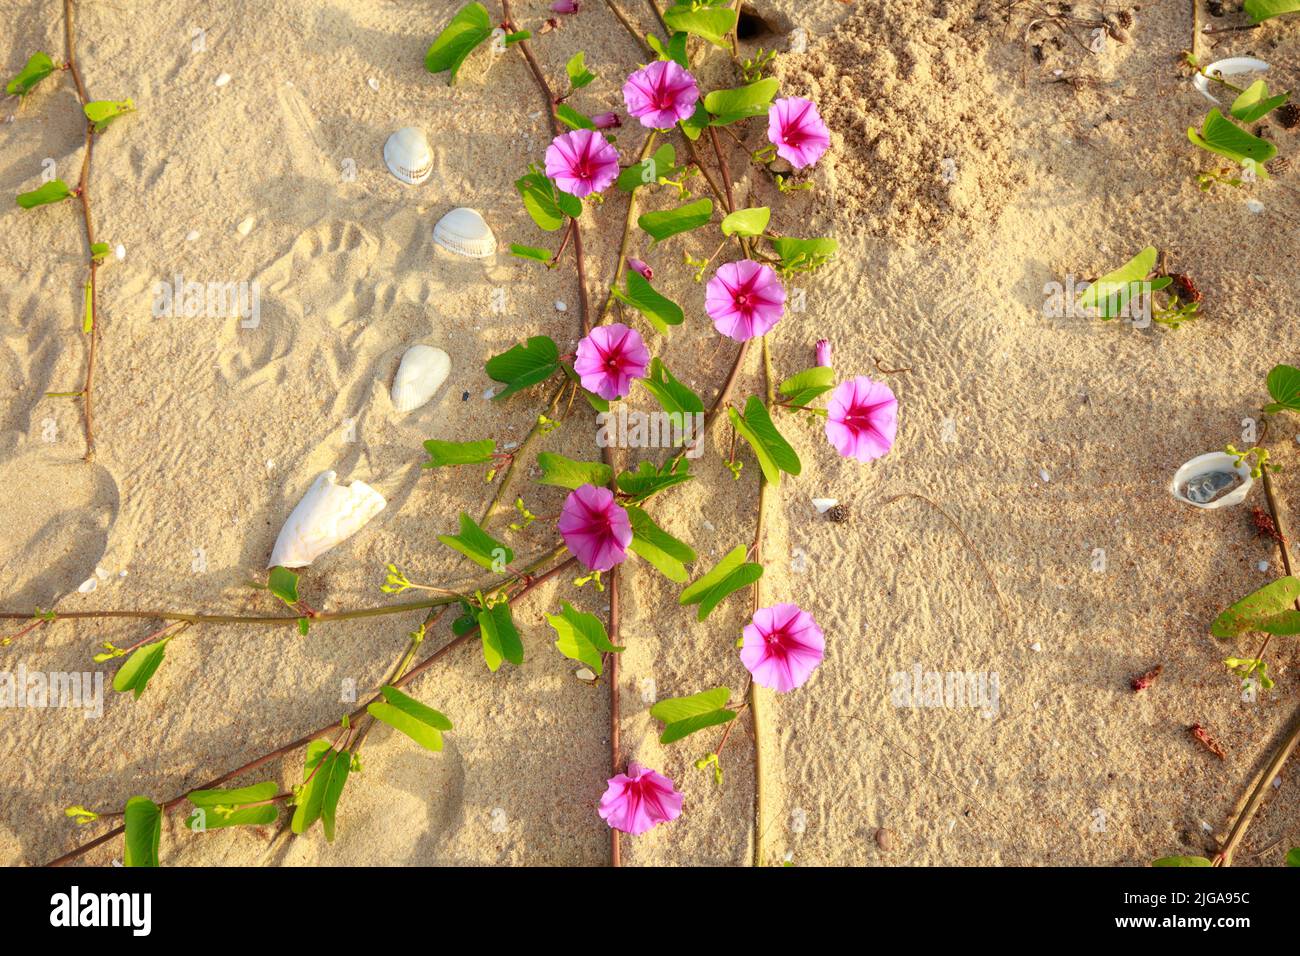 Water spinach flowers on the beach Stock Photo